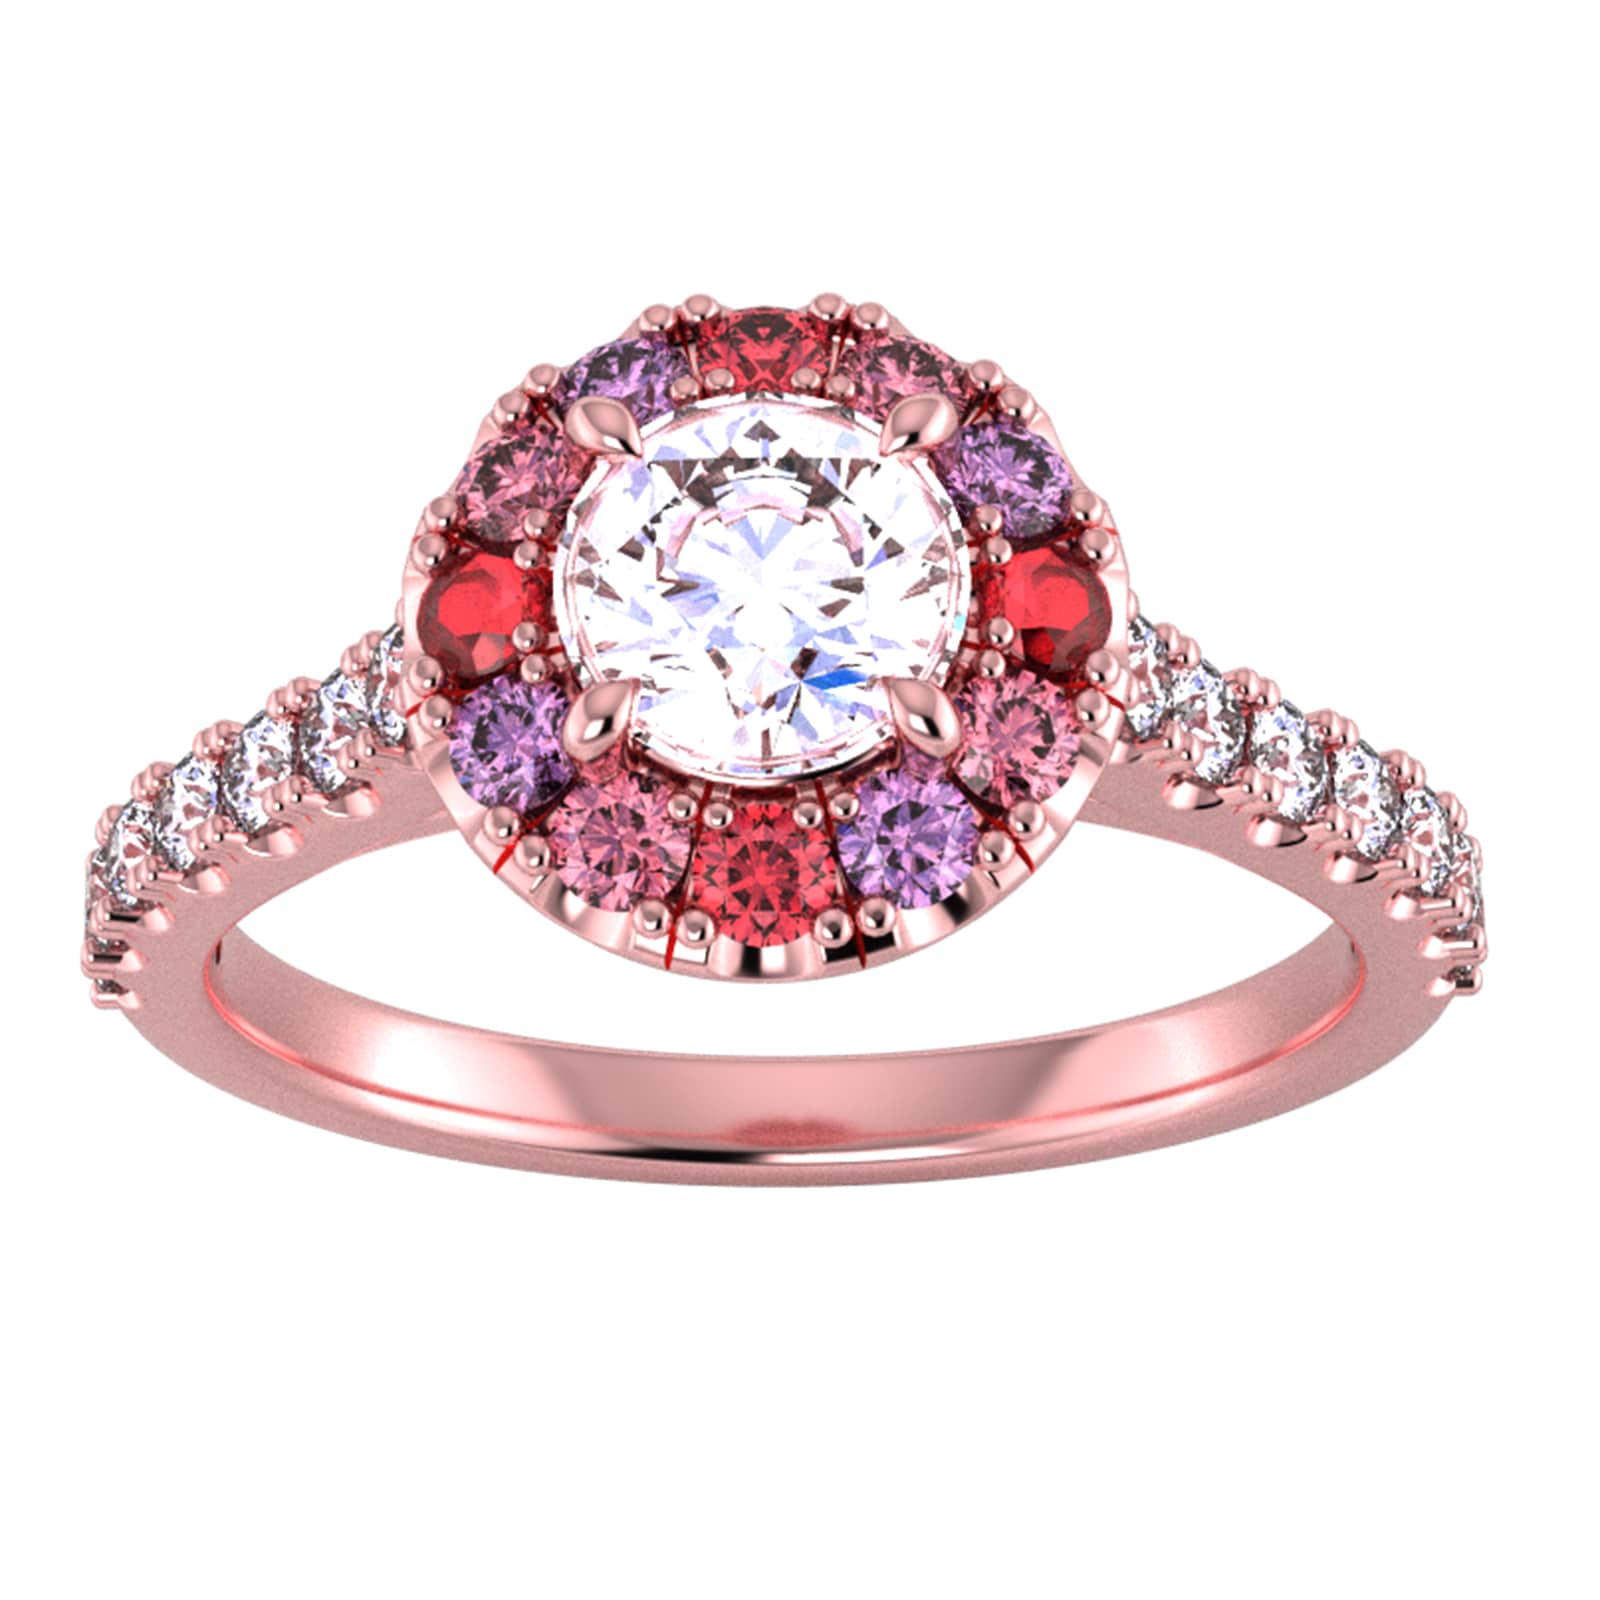 9ct Rose Gold Diamond & Pink, Red, Purple Sapphire Halo Ring - Ring Size N